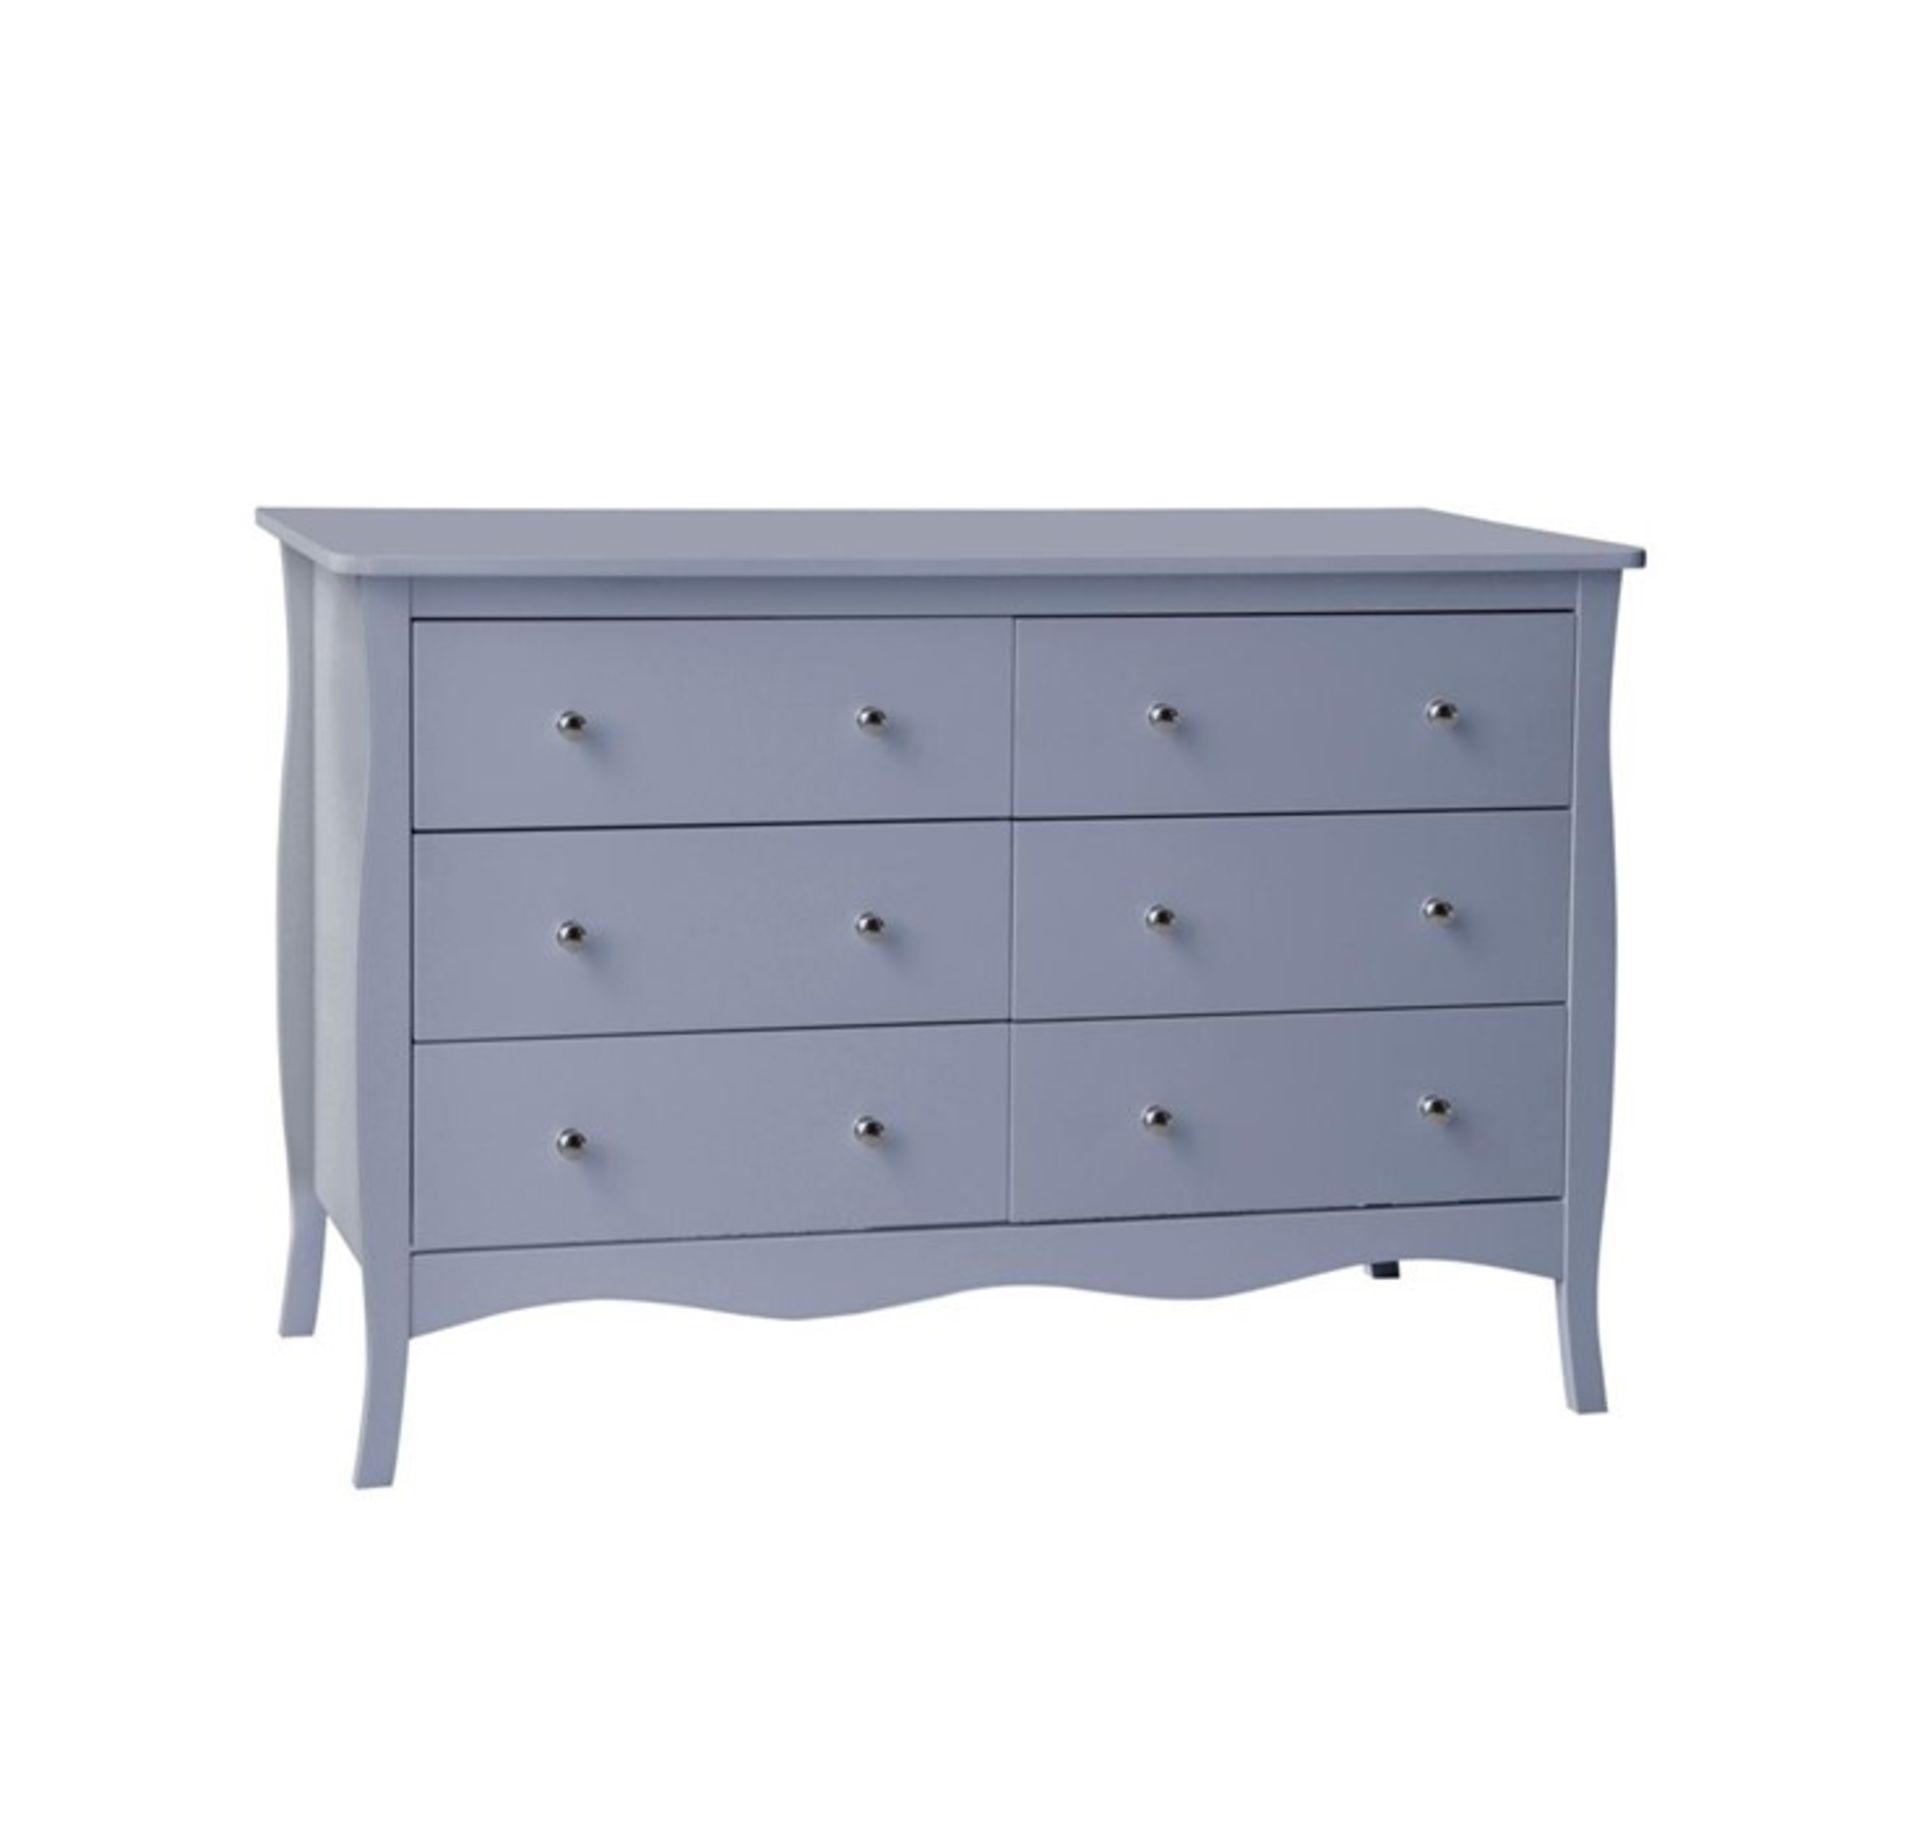 1 BOXED PARIS 6 DRAWER CHEST IN GREY (PUBLIC VIEWING AVAILABLE)